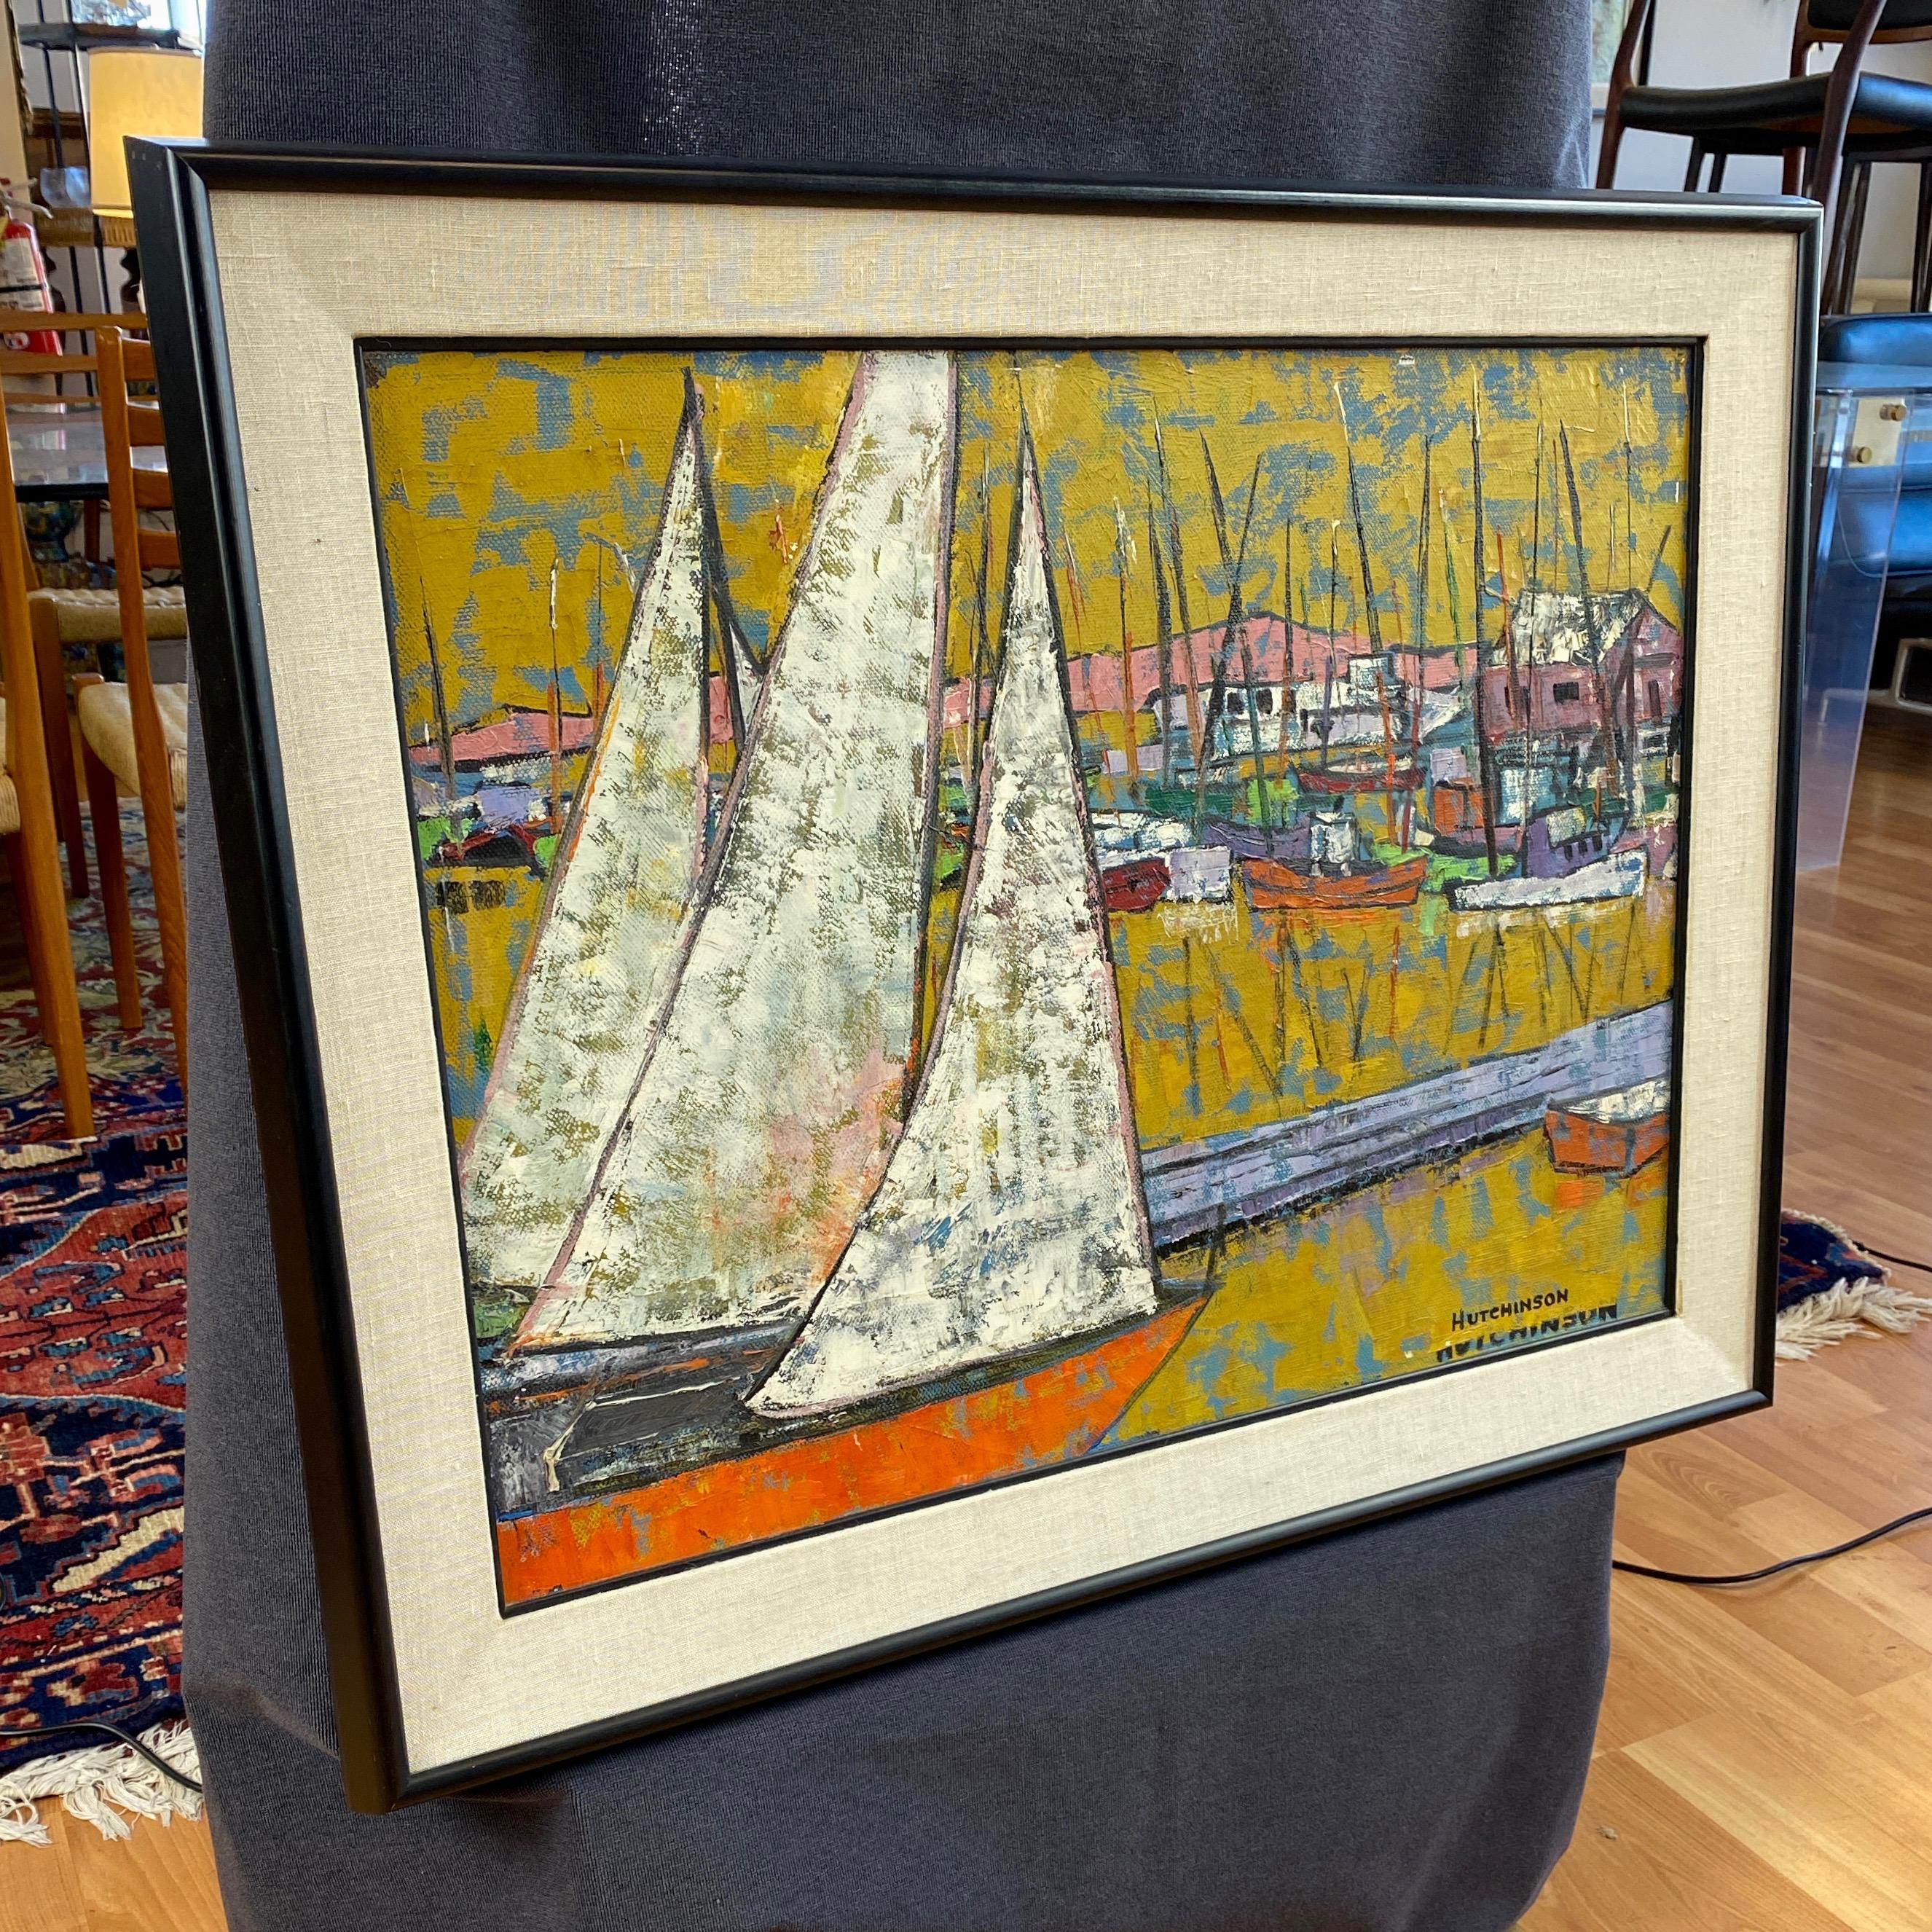 American Hutchinson “Boats in Harbor”, Expressionist Acrylic Painting, 1950s